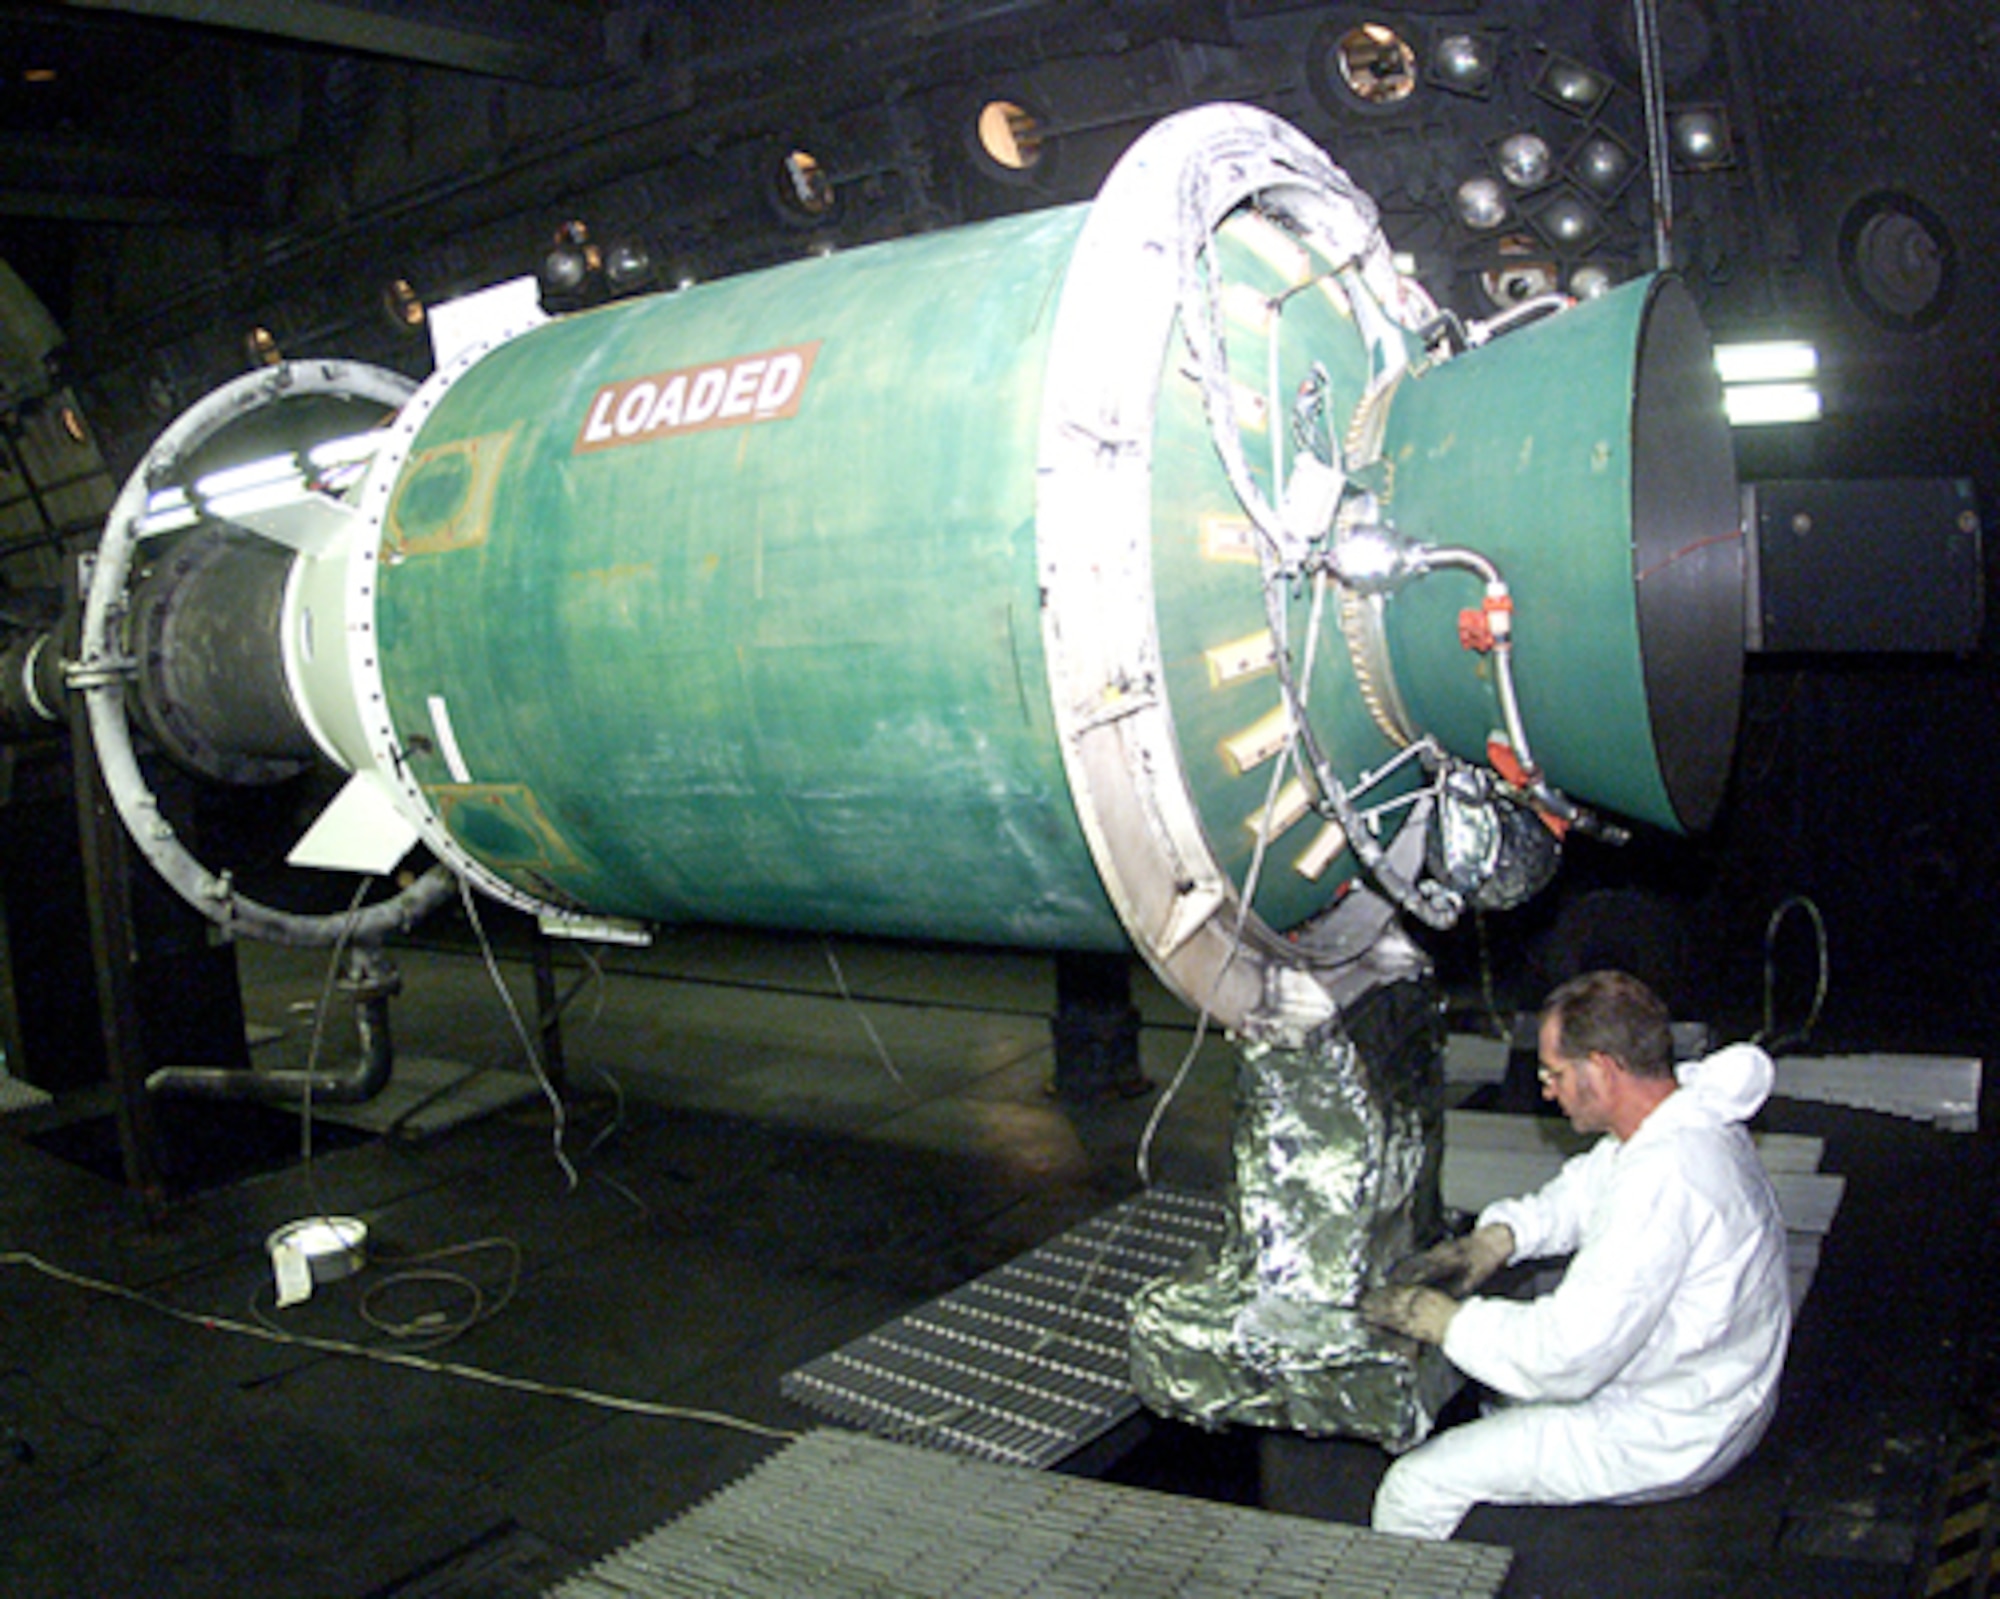 AEDC outside machinist J. R. Dunham prepares a Minuteman Stage III motor before testing in J-6 in 2003. Operators fired the randomly selected motor at a simulated altitude of 100,000 feet to qualify the motor’s production lot. The test confirmed contaminants in the propellant did not impact motor performance.